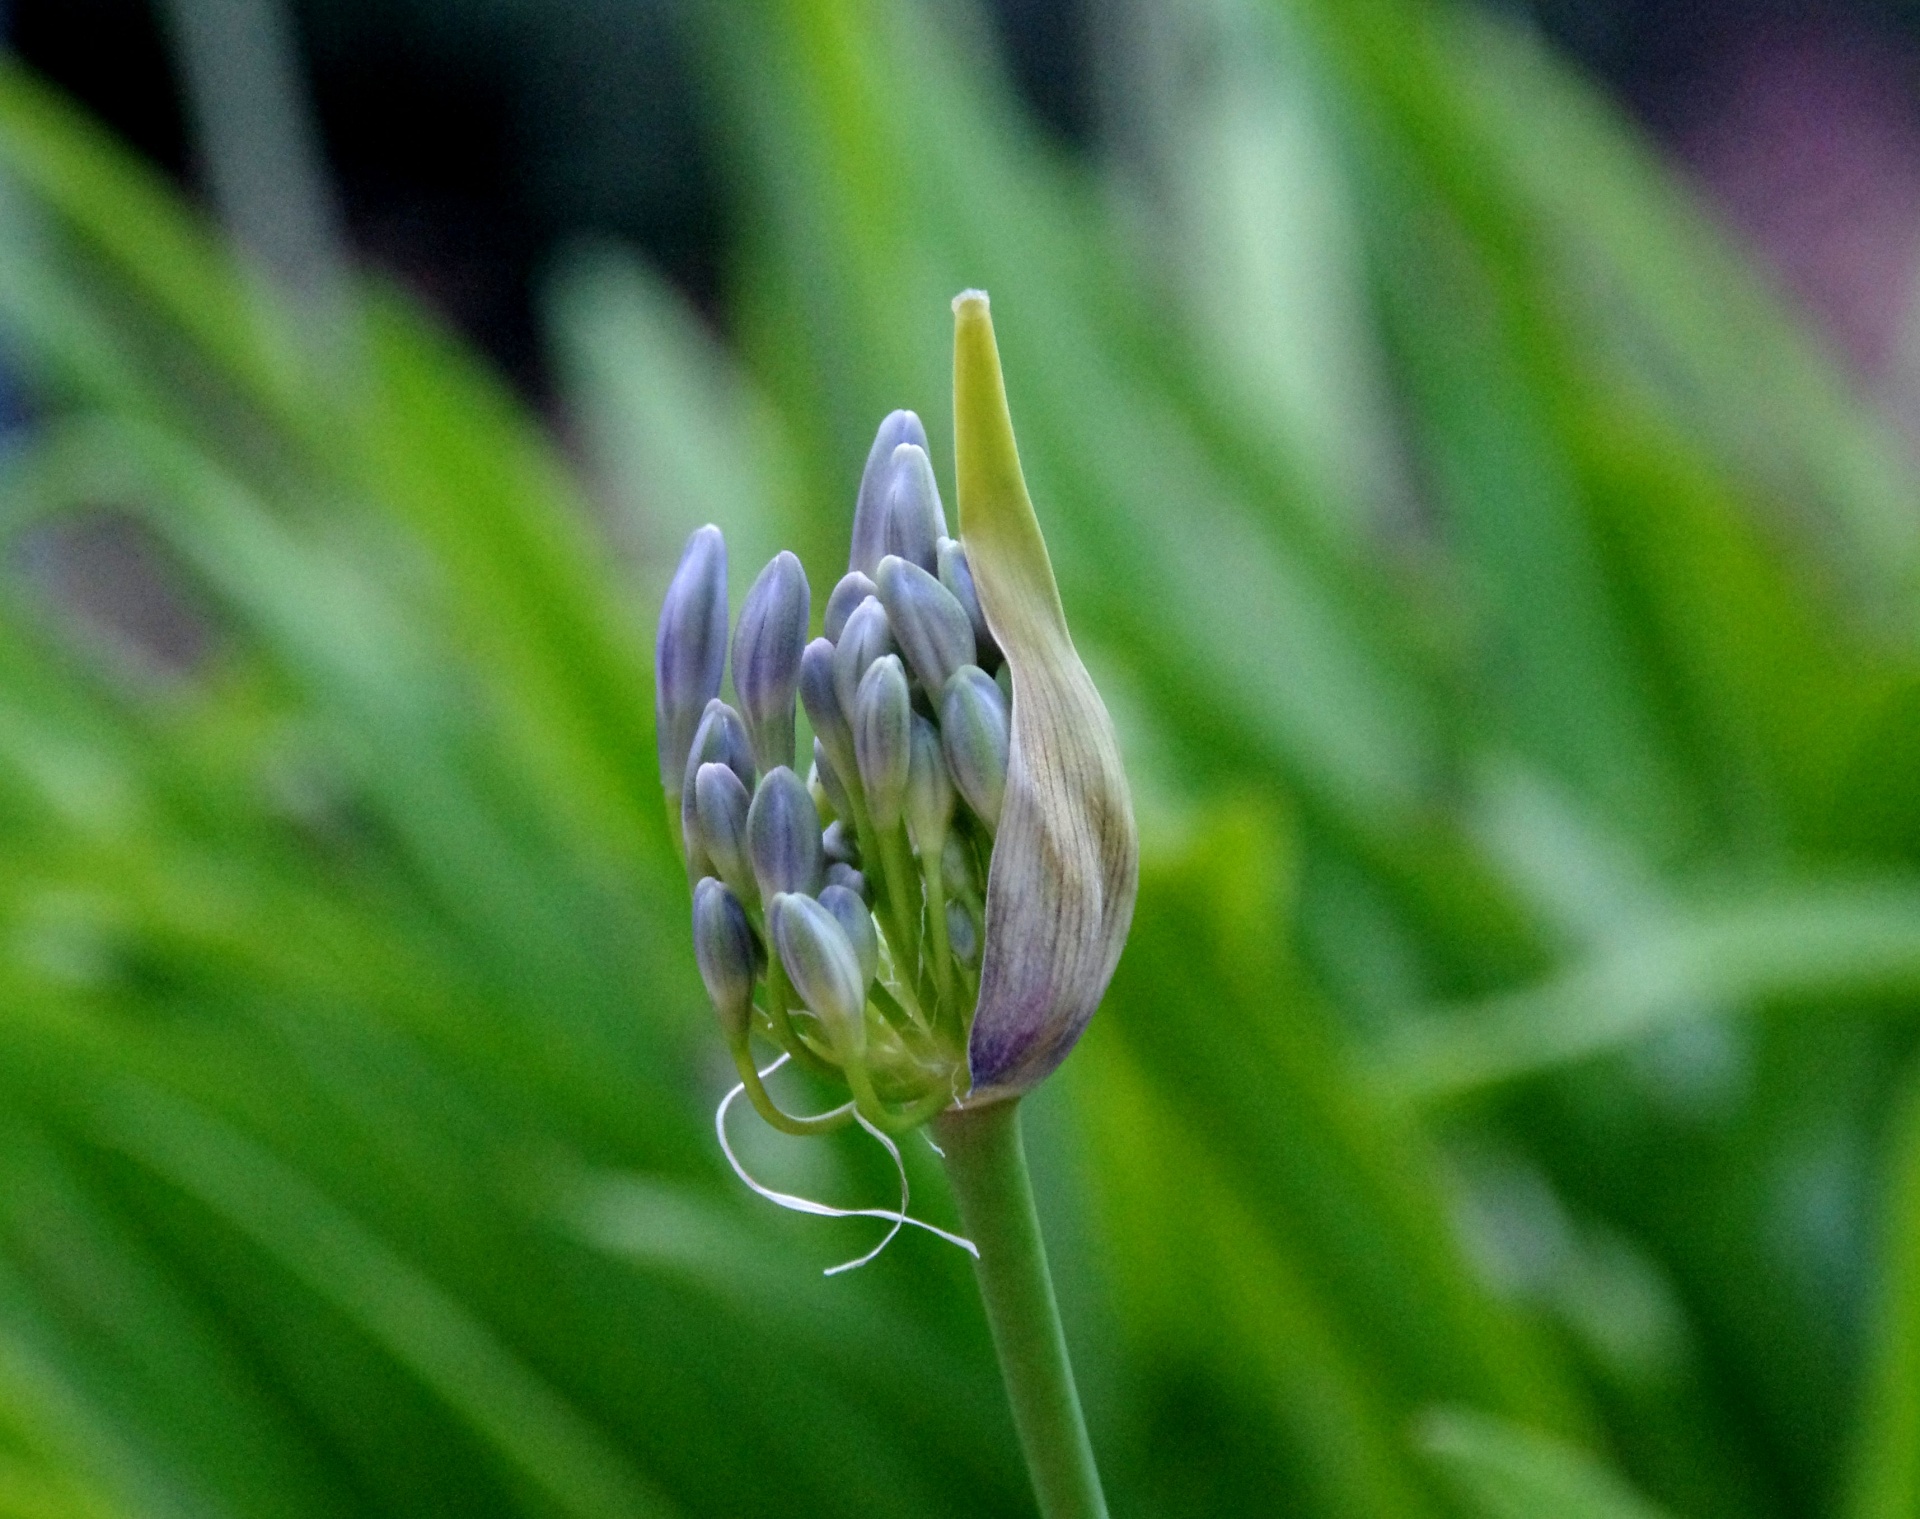 Young Agapanthus bud about to open against green background